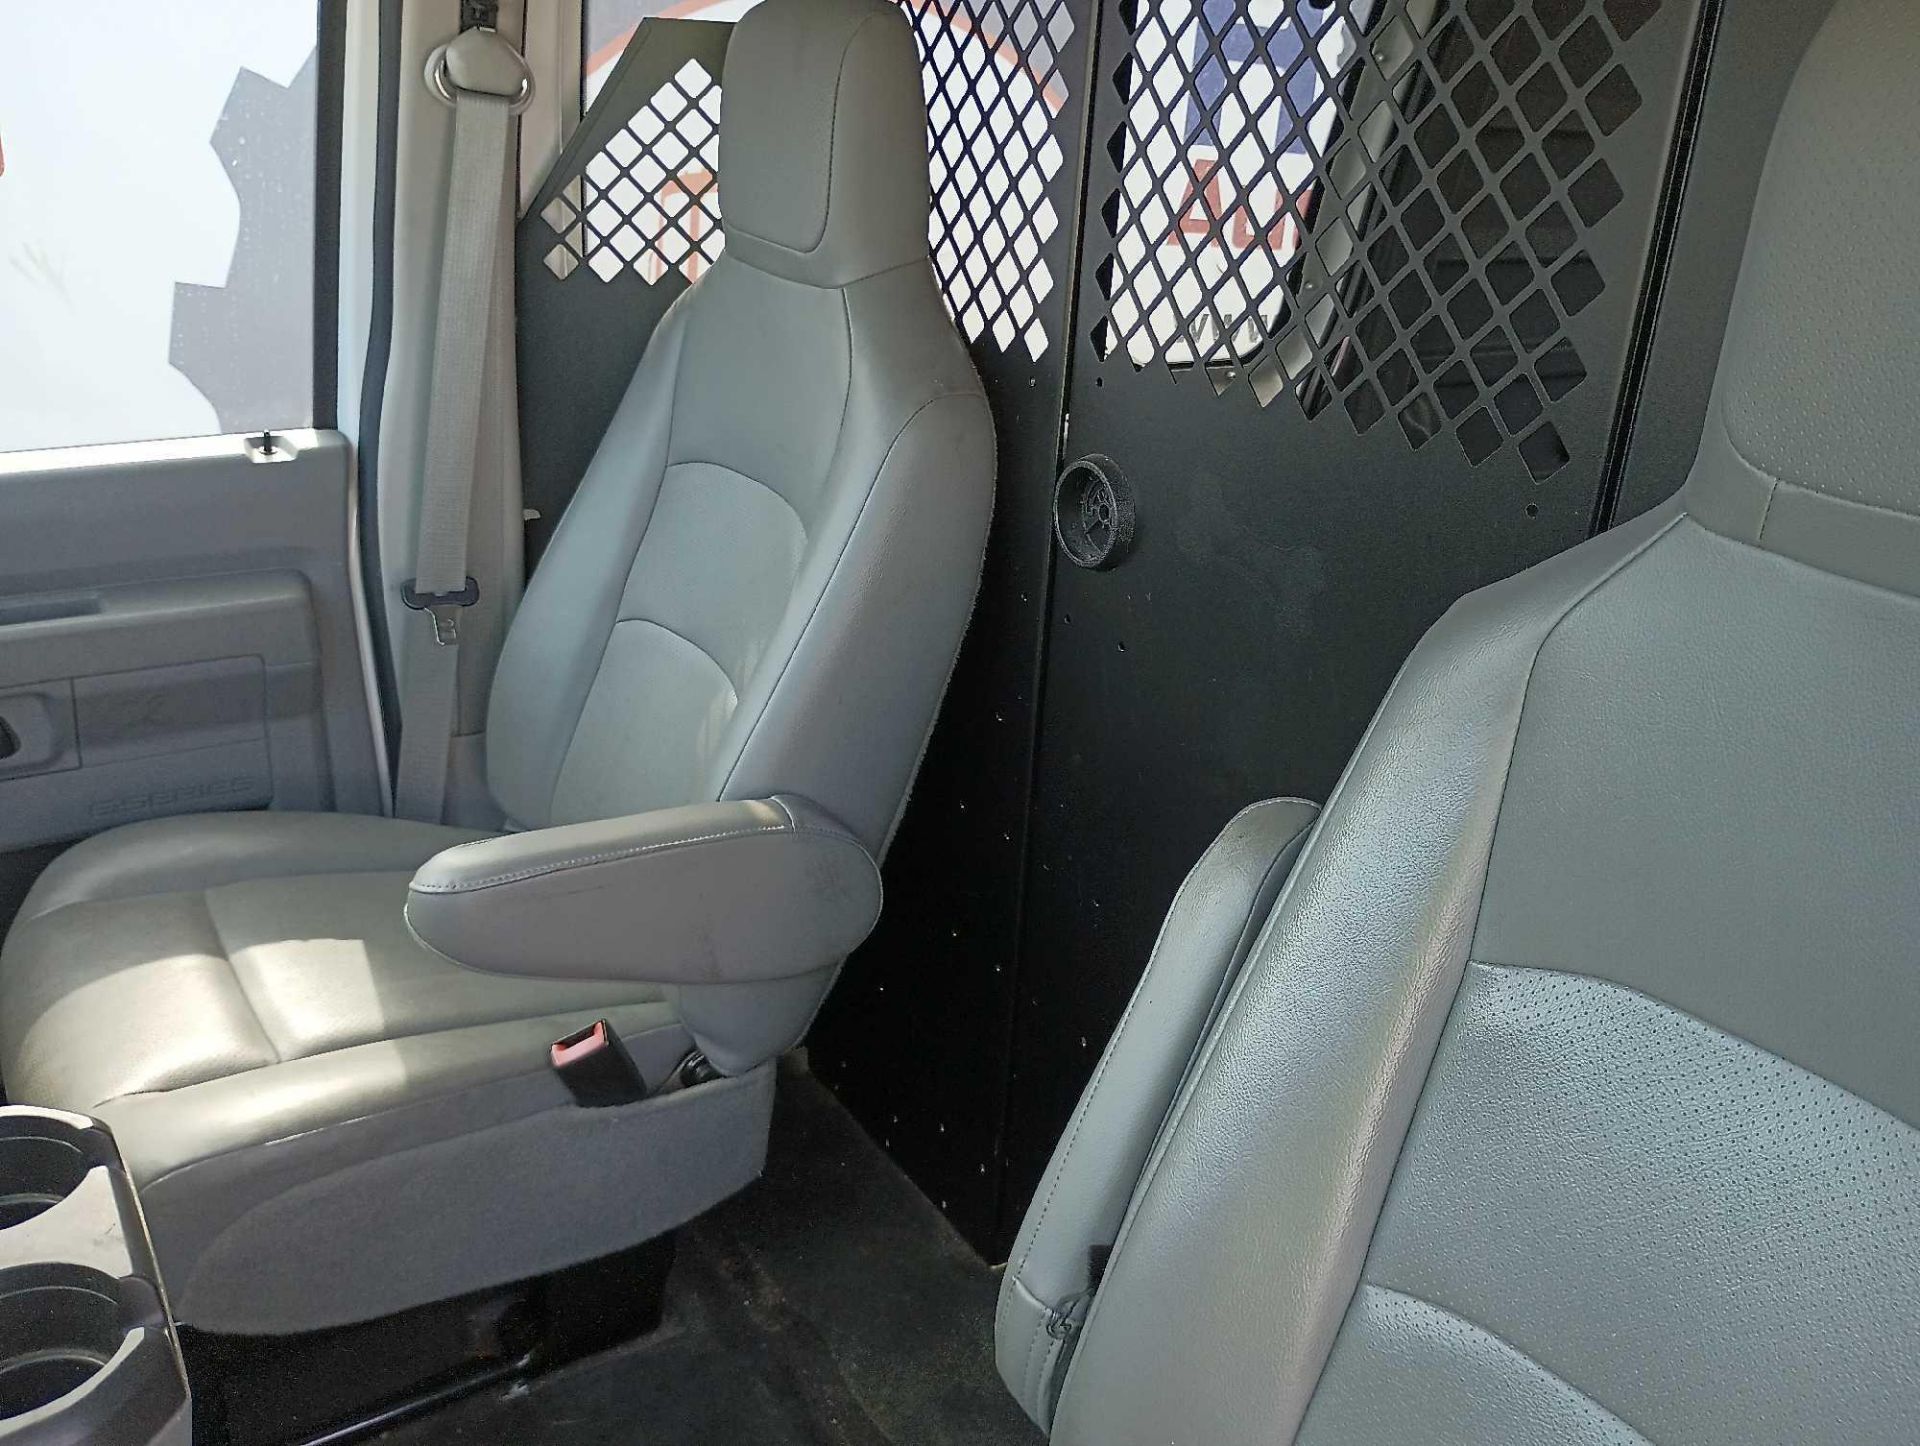 2014 Ford E350 Extended Cargo Van - Image 16 of 24